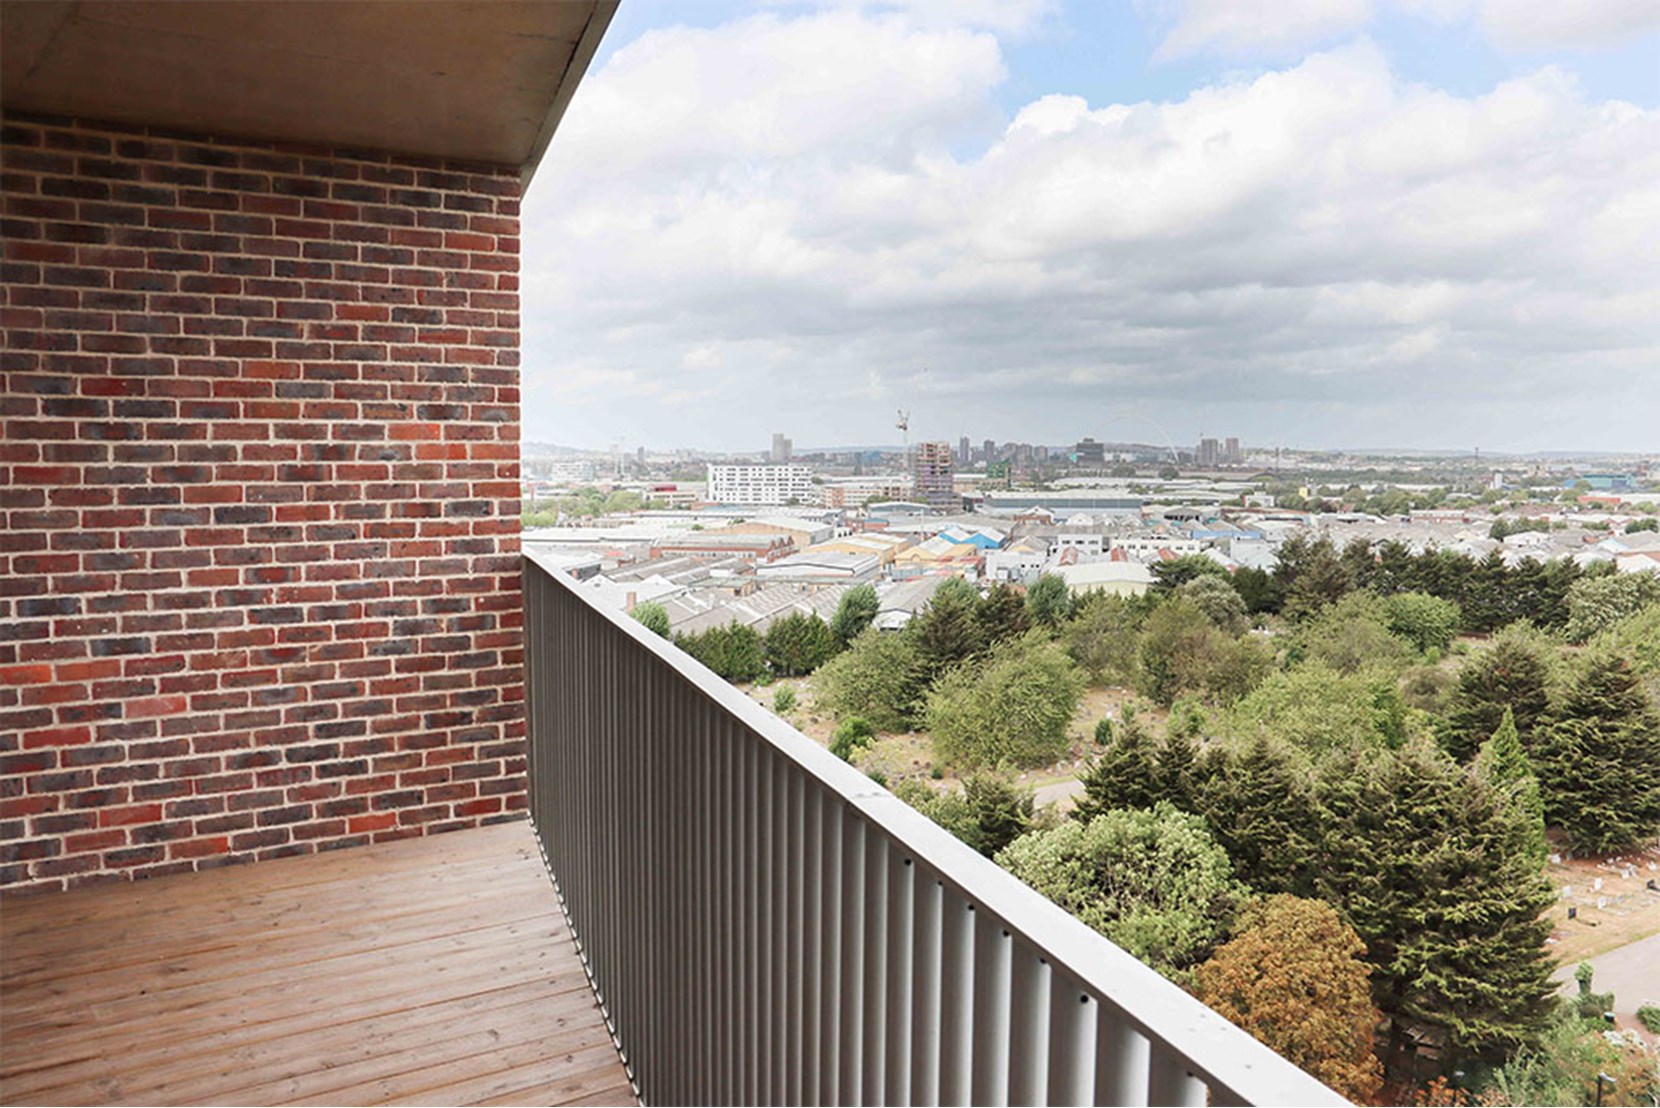 Apartments to Rent by Savills at Rehearsal Rooms, Ealing, W3, private balcony